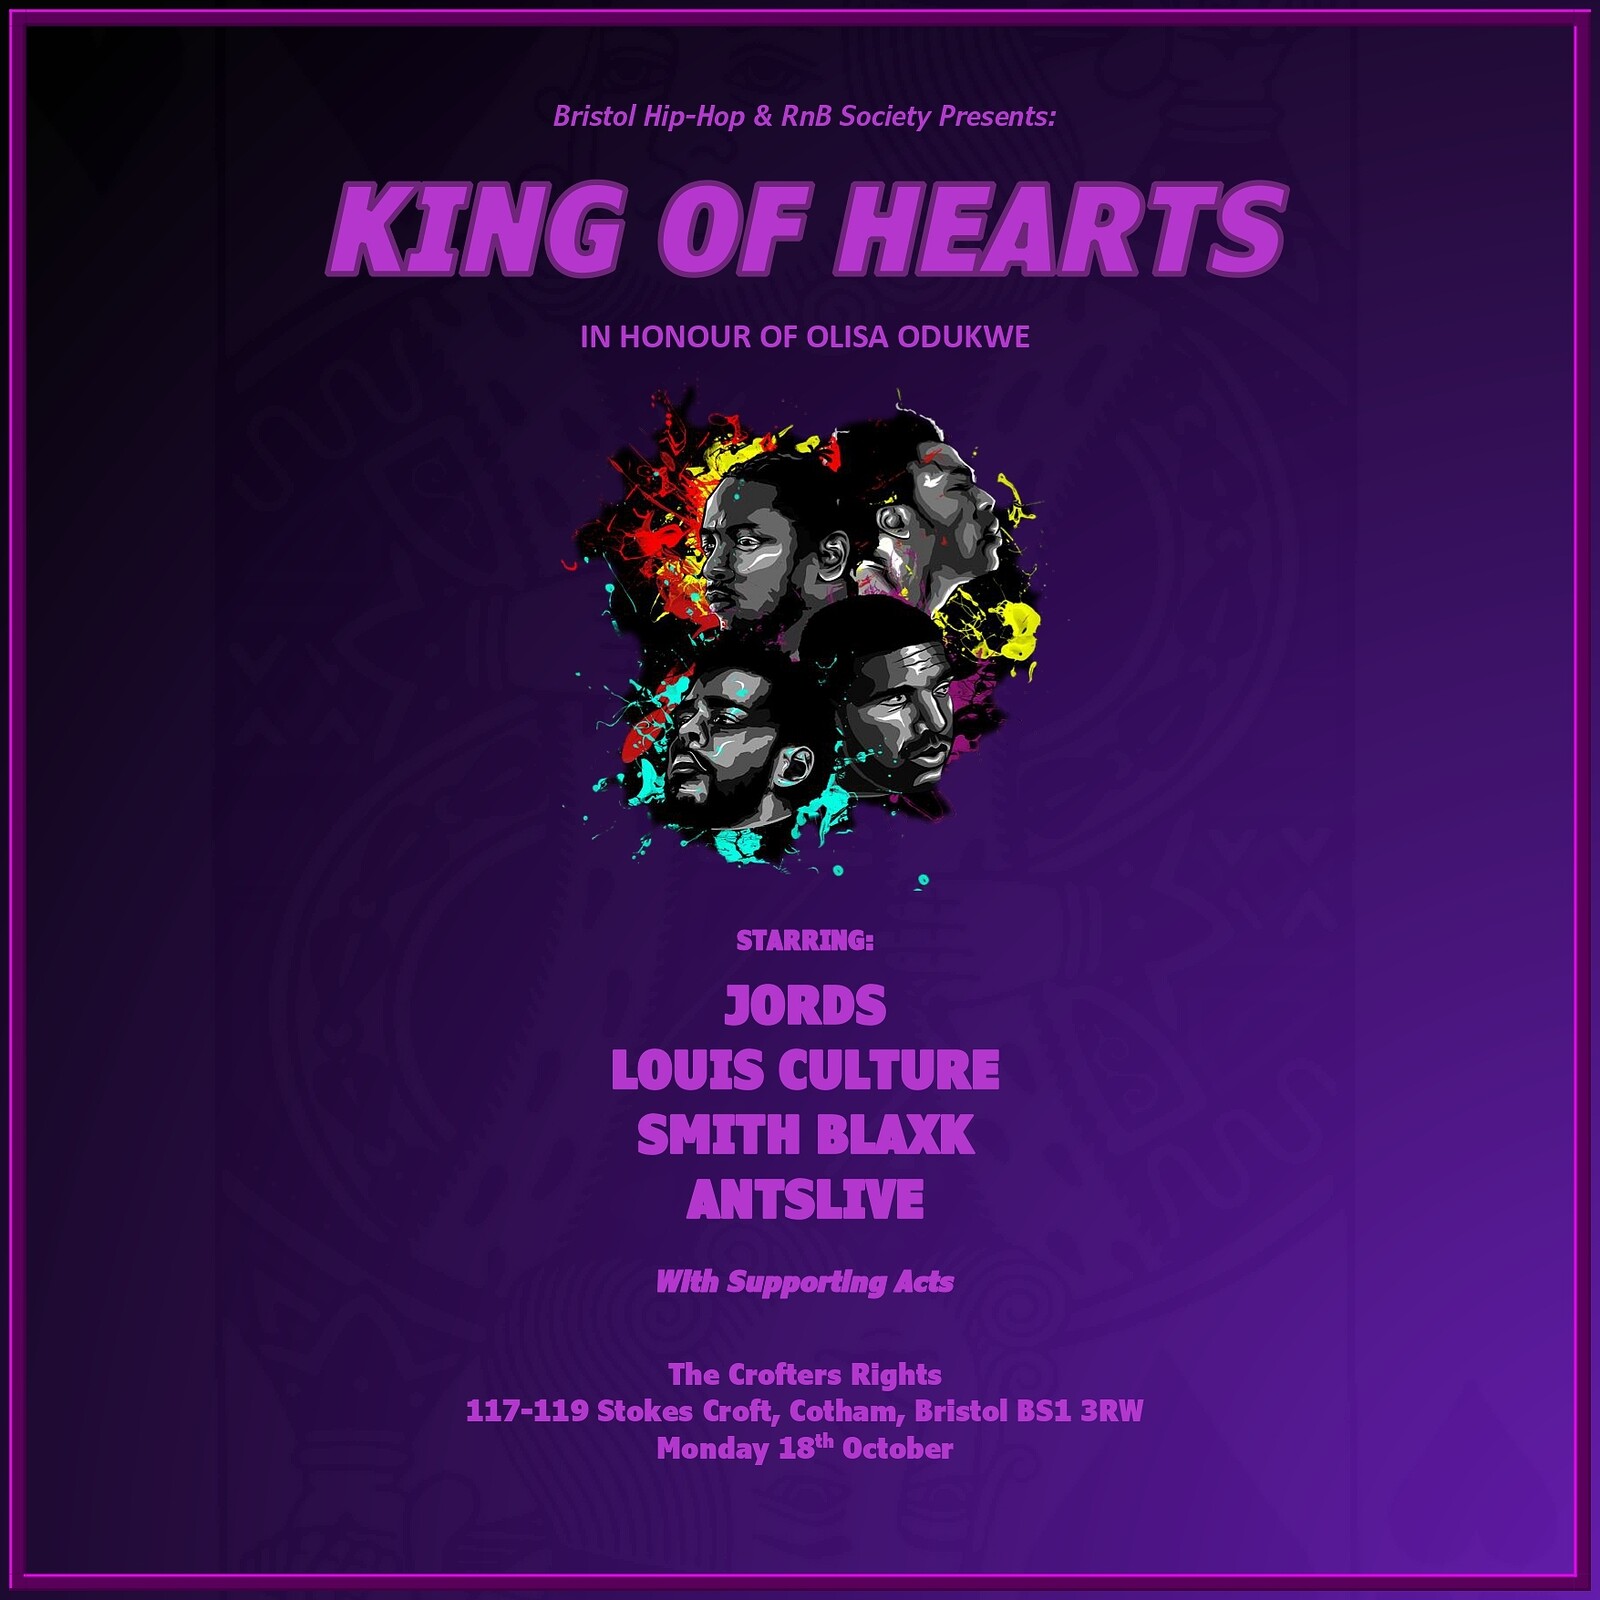 King of Hearts: In Honour of Olisa Odukwe at Crofters Rights